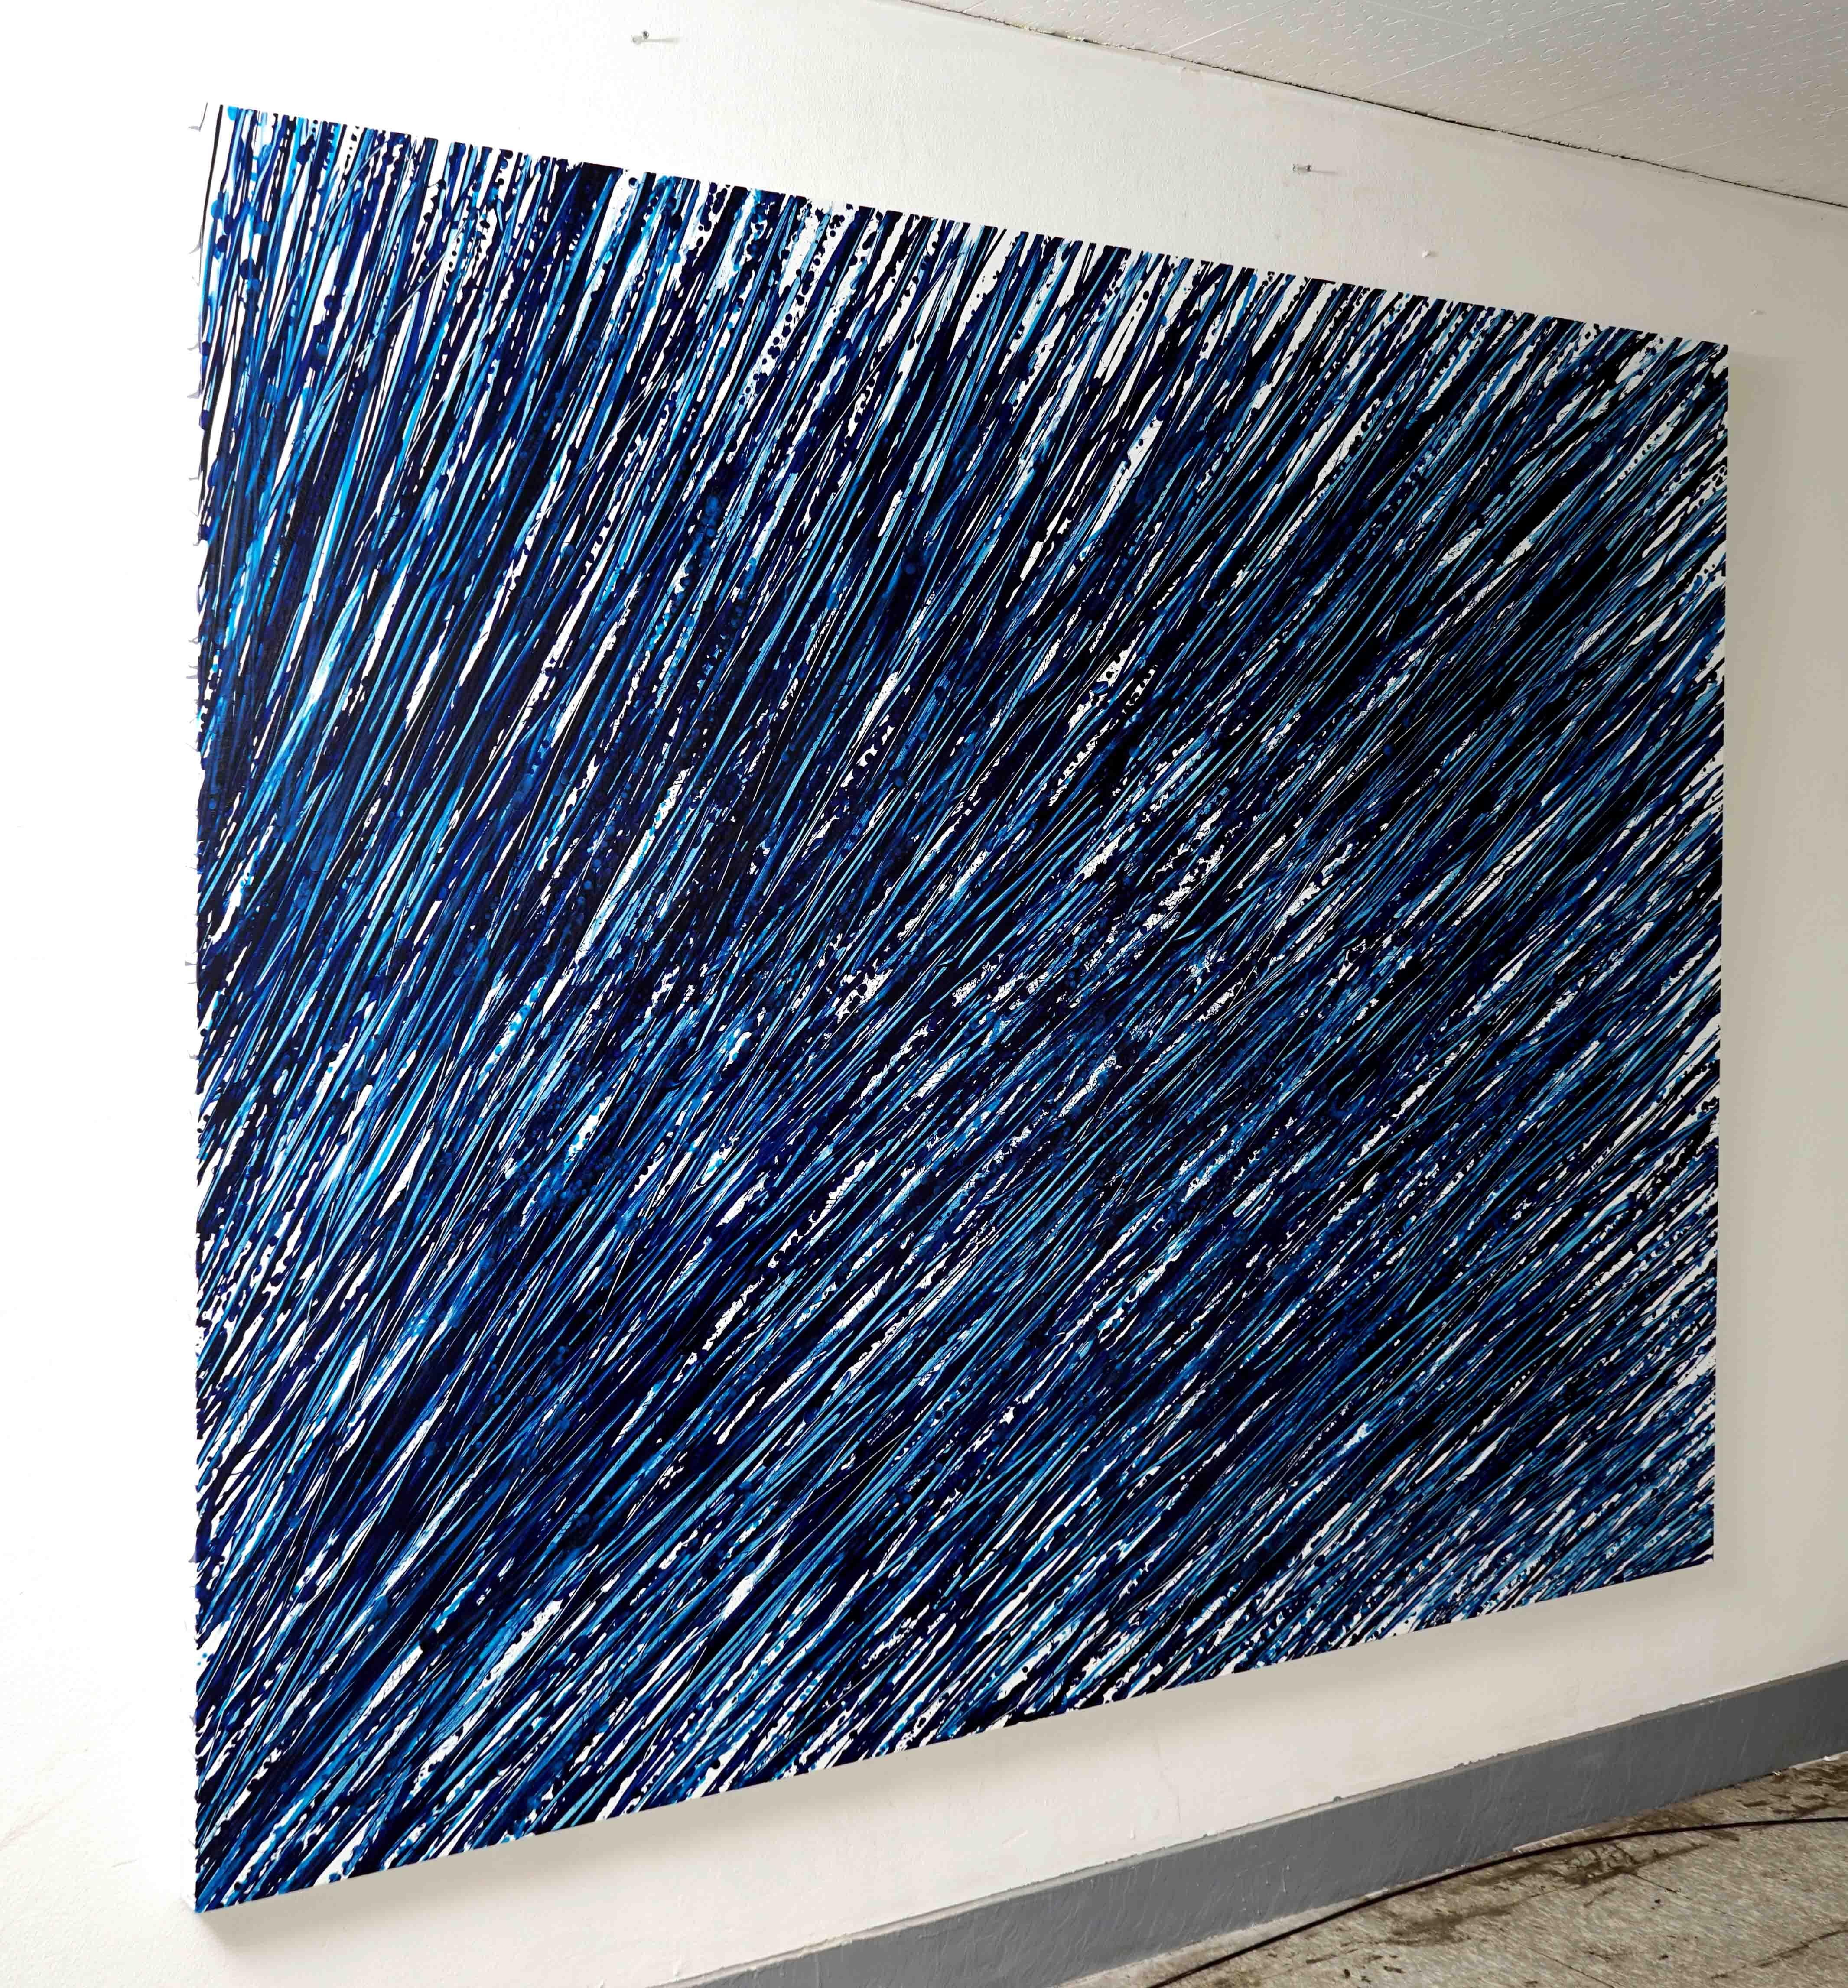 Beginning of the stop 49, Blue Abstract Art Oil Painting Contemporary Canvas - Black Interior Painting by Seungyoon Choi